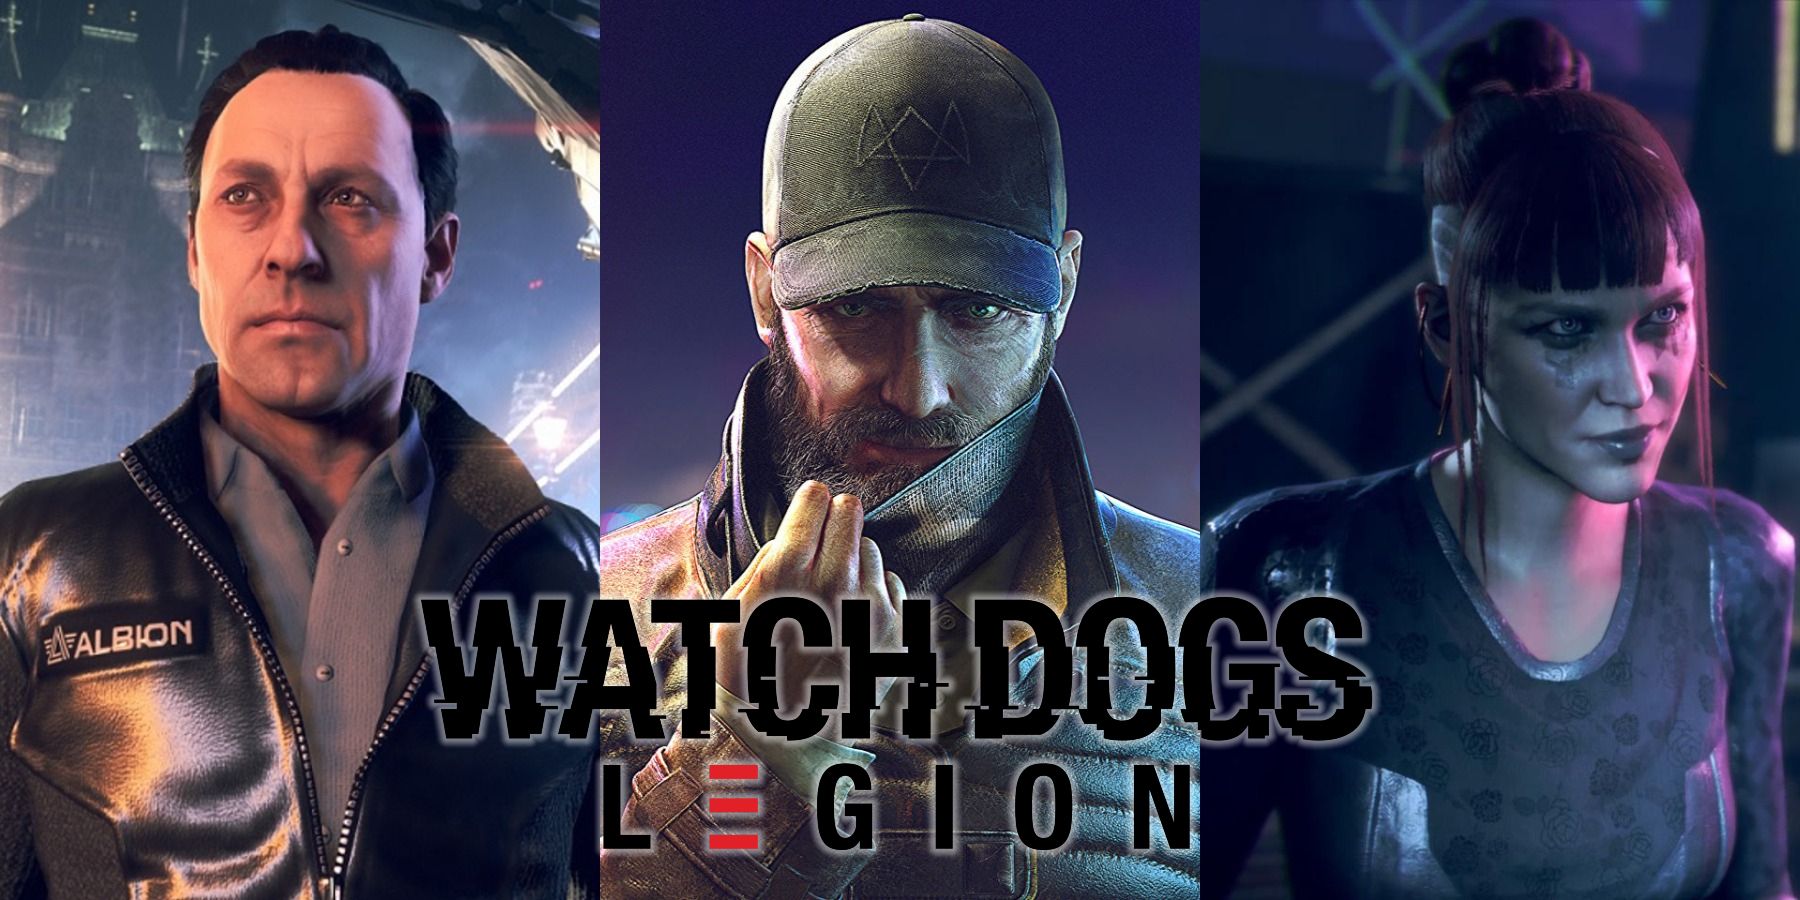 Aiden Pearce | Watch dogs game, Watch dogs art, Watch dogs